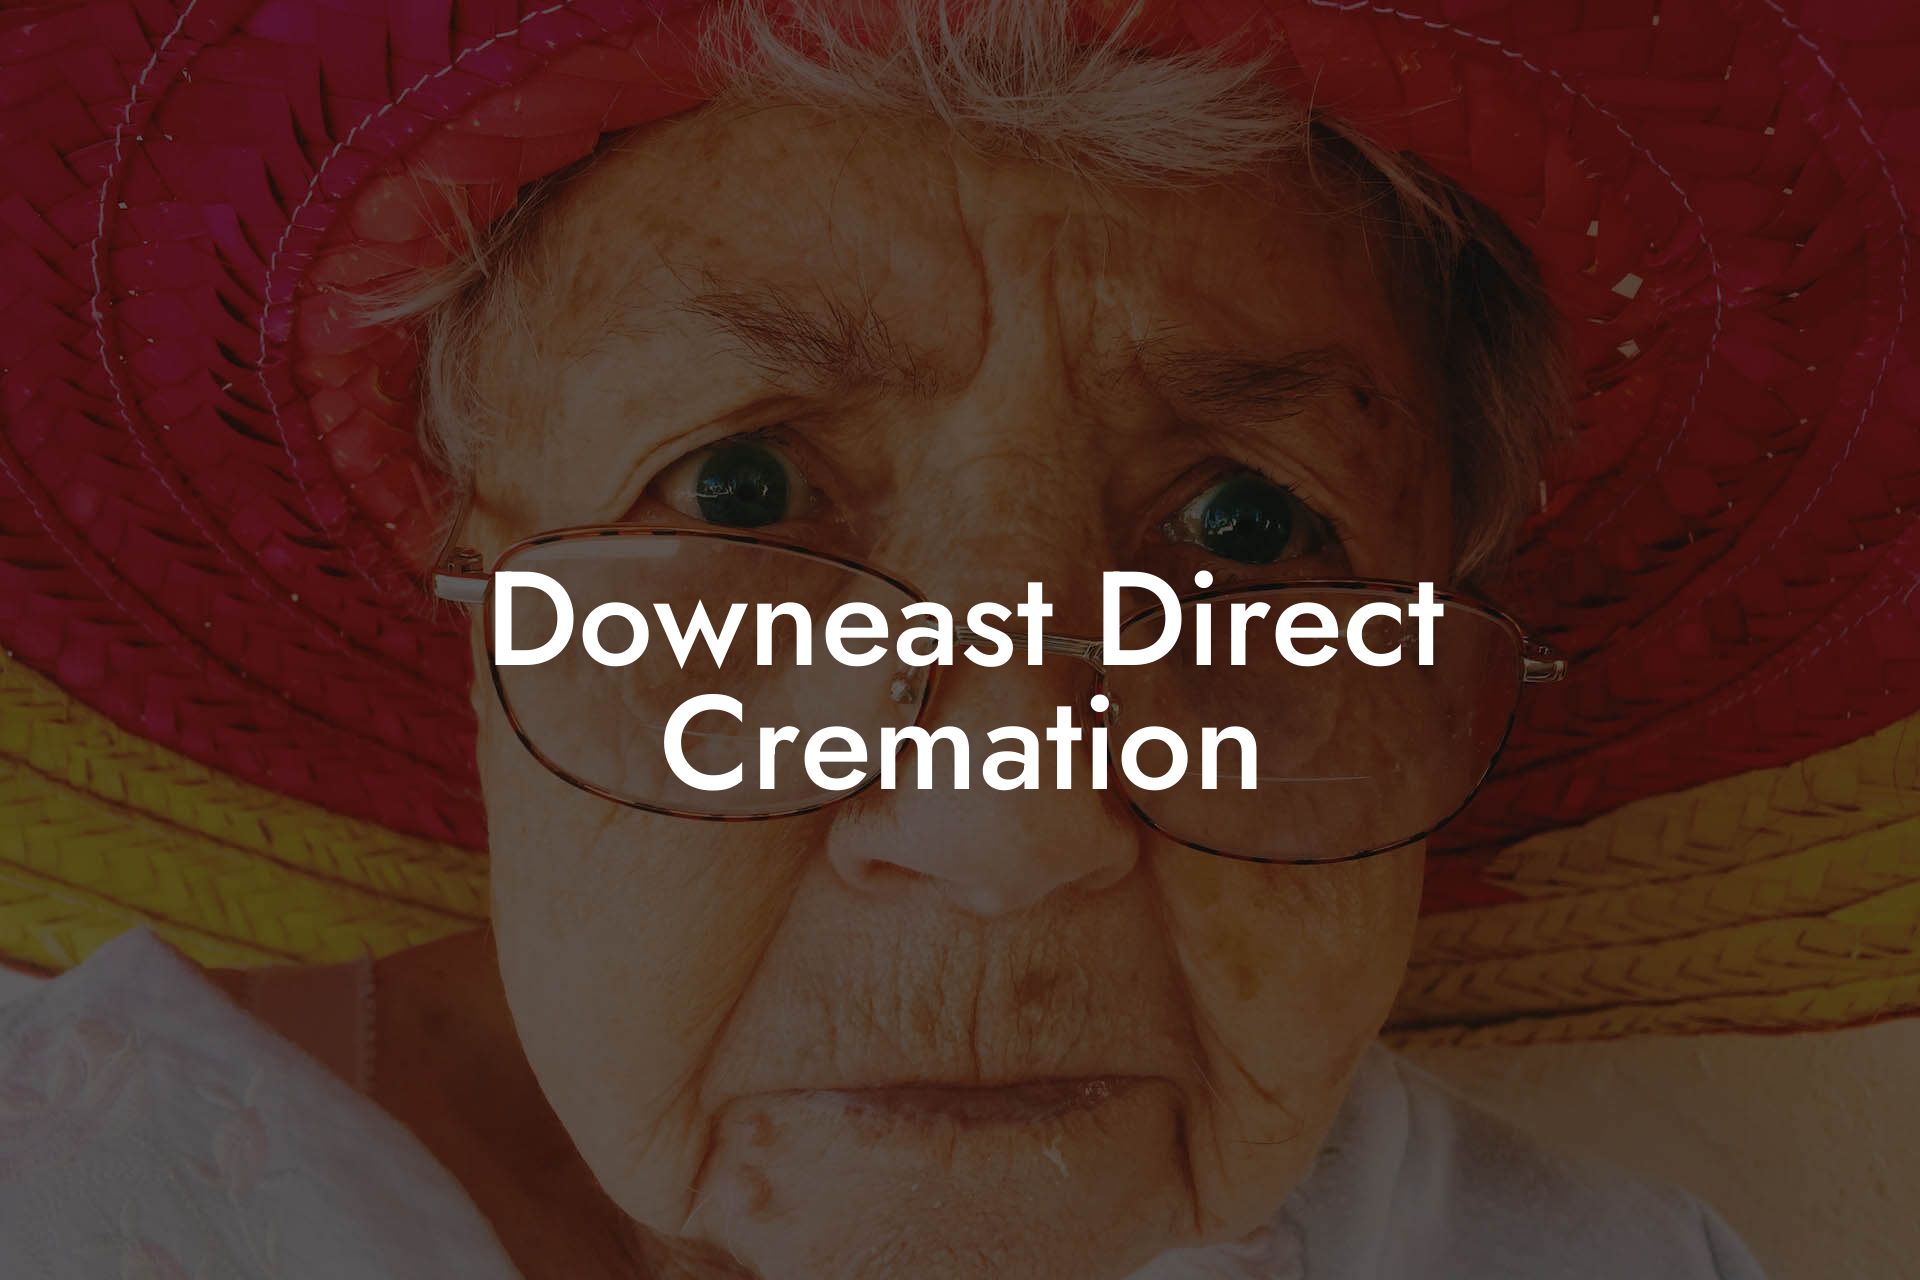 Downeast Direct Cremation